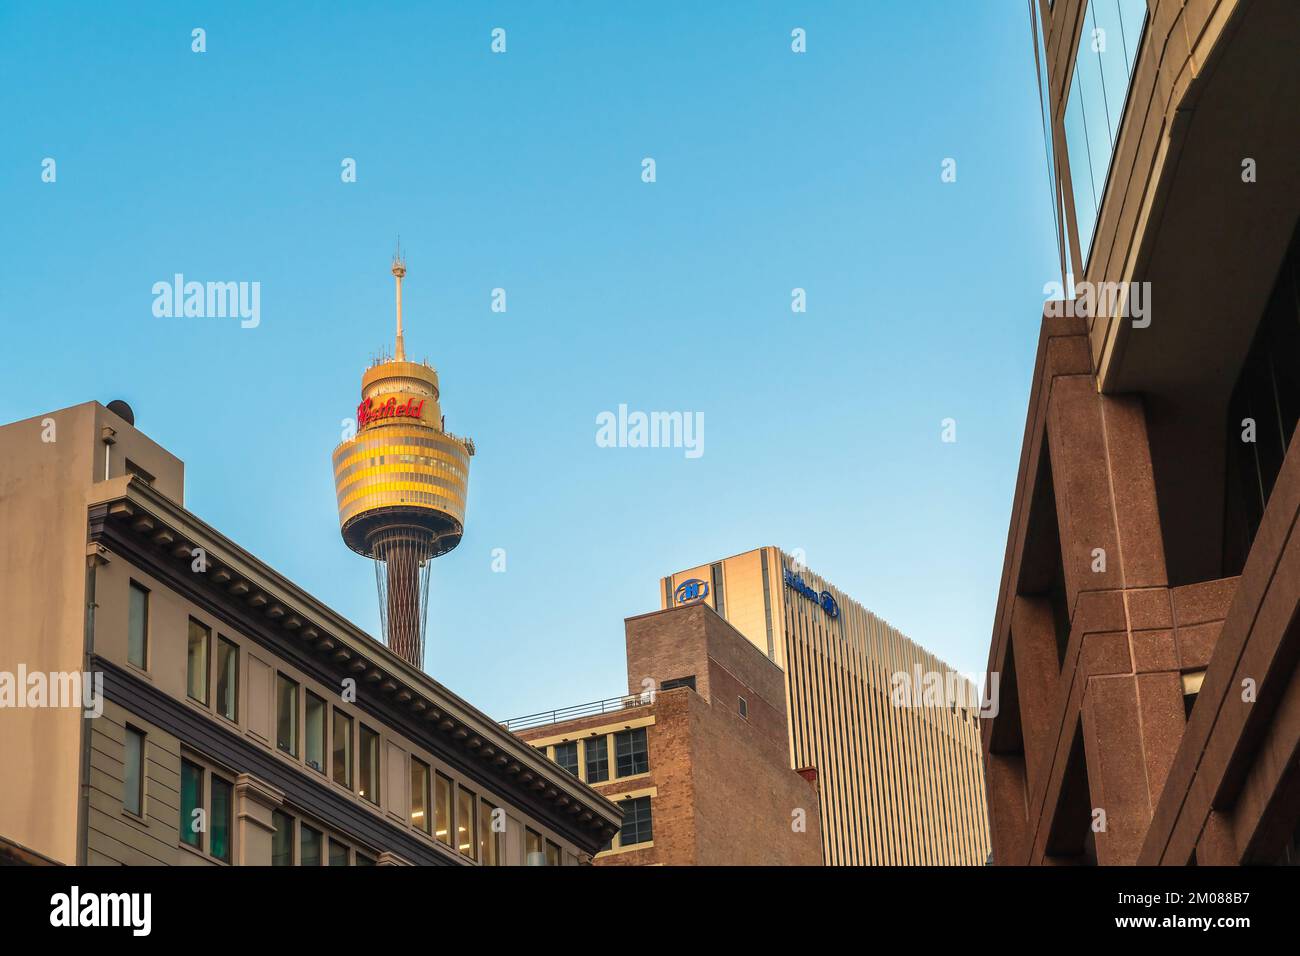 Sydney, Australia - April 16, 2022: Iconic Sydney Tower Eye looking up from the ground at dusk. Sydney Tower is the second tallest observation tower i Stock Photo